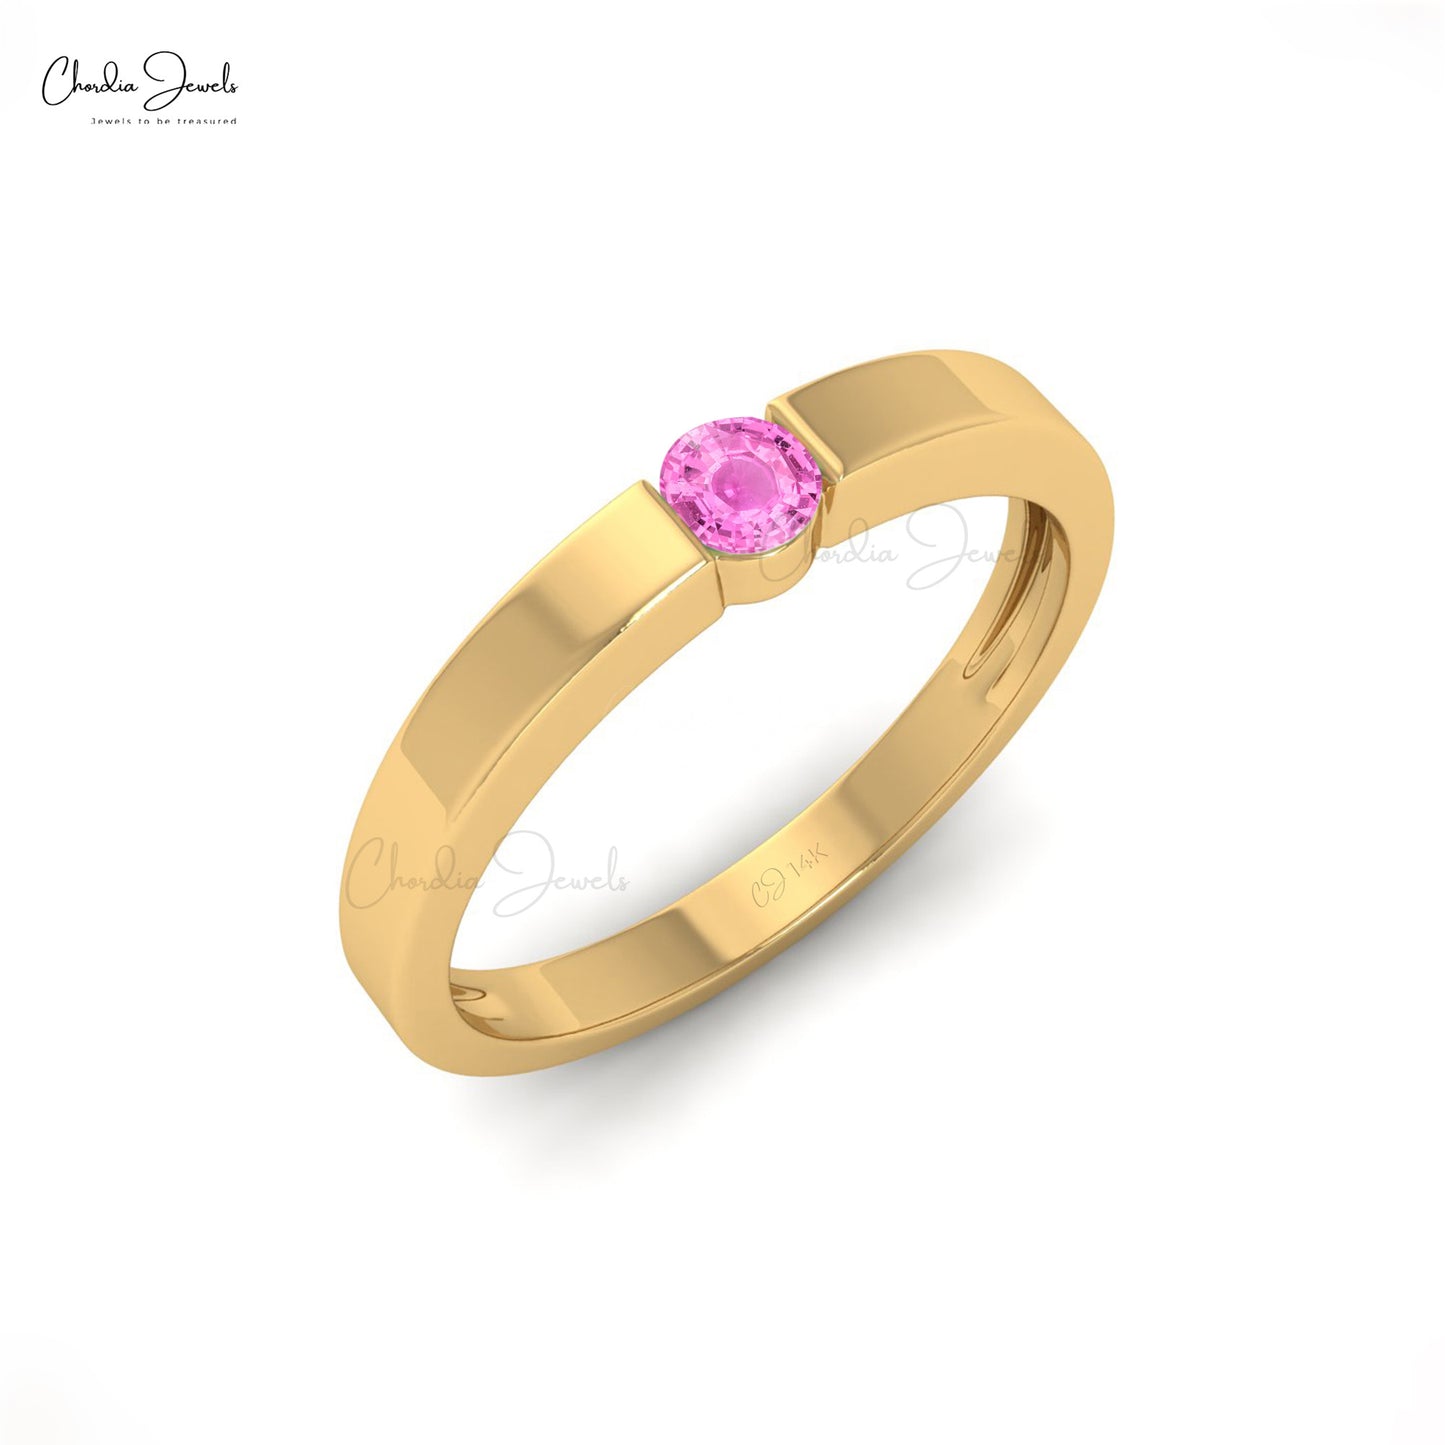 Genuine 3mm Round Cut Pink Saphhire Solitaire Ring For Gift, 14k Solid Gold Natural Gemstone Anniversary Ring